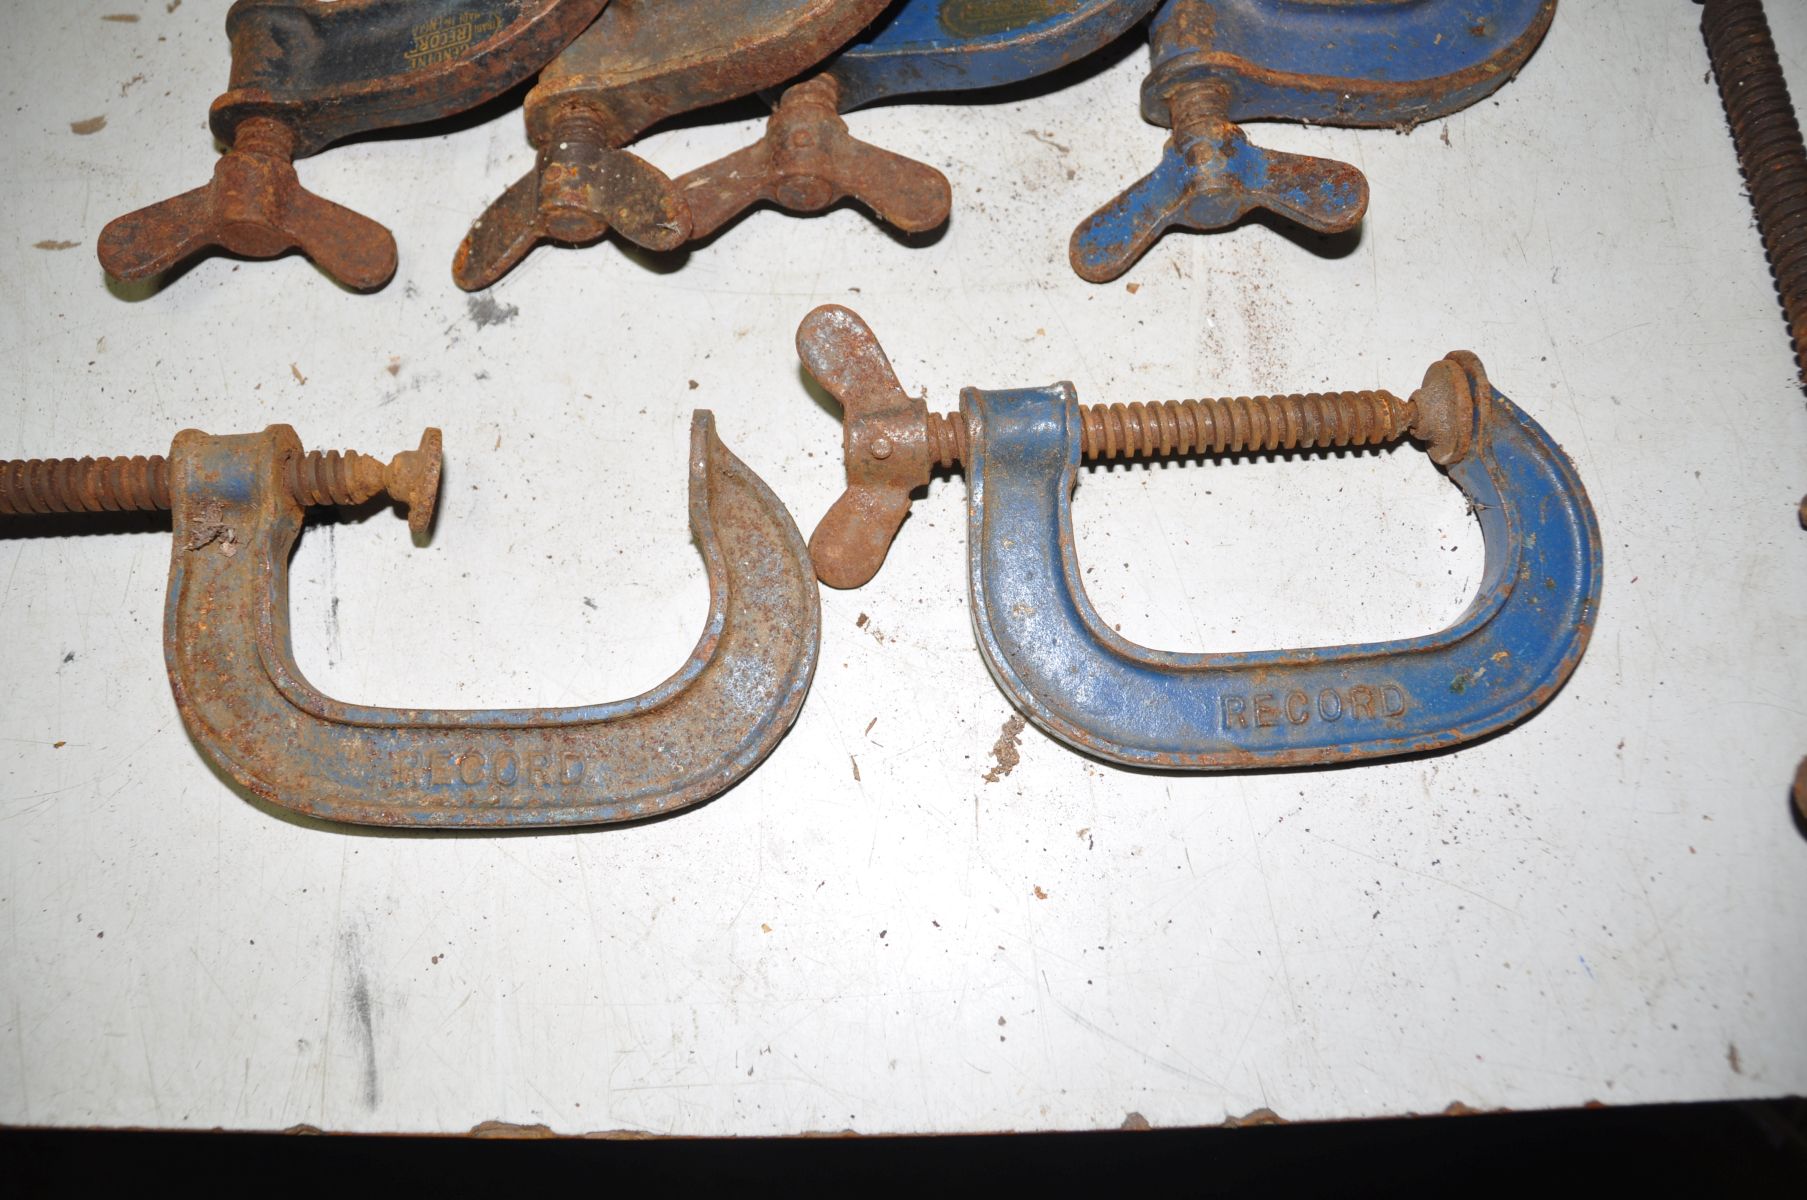 FIVE RECORD No6 G-CLAMPS and two Record No3 G-clamps (some rust) - Bild 3 aus 4